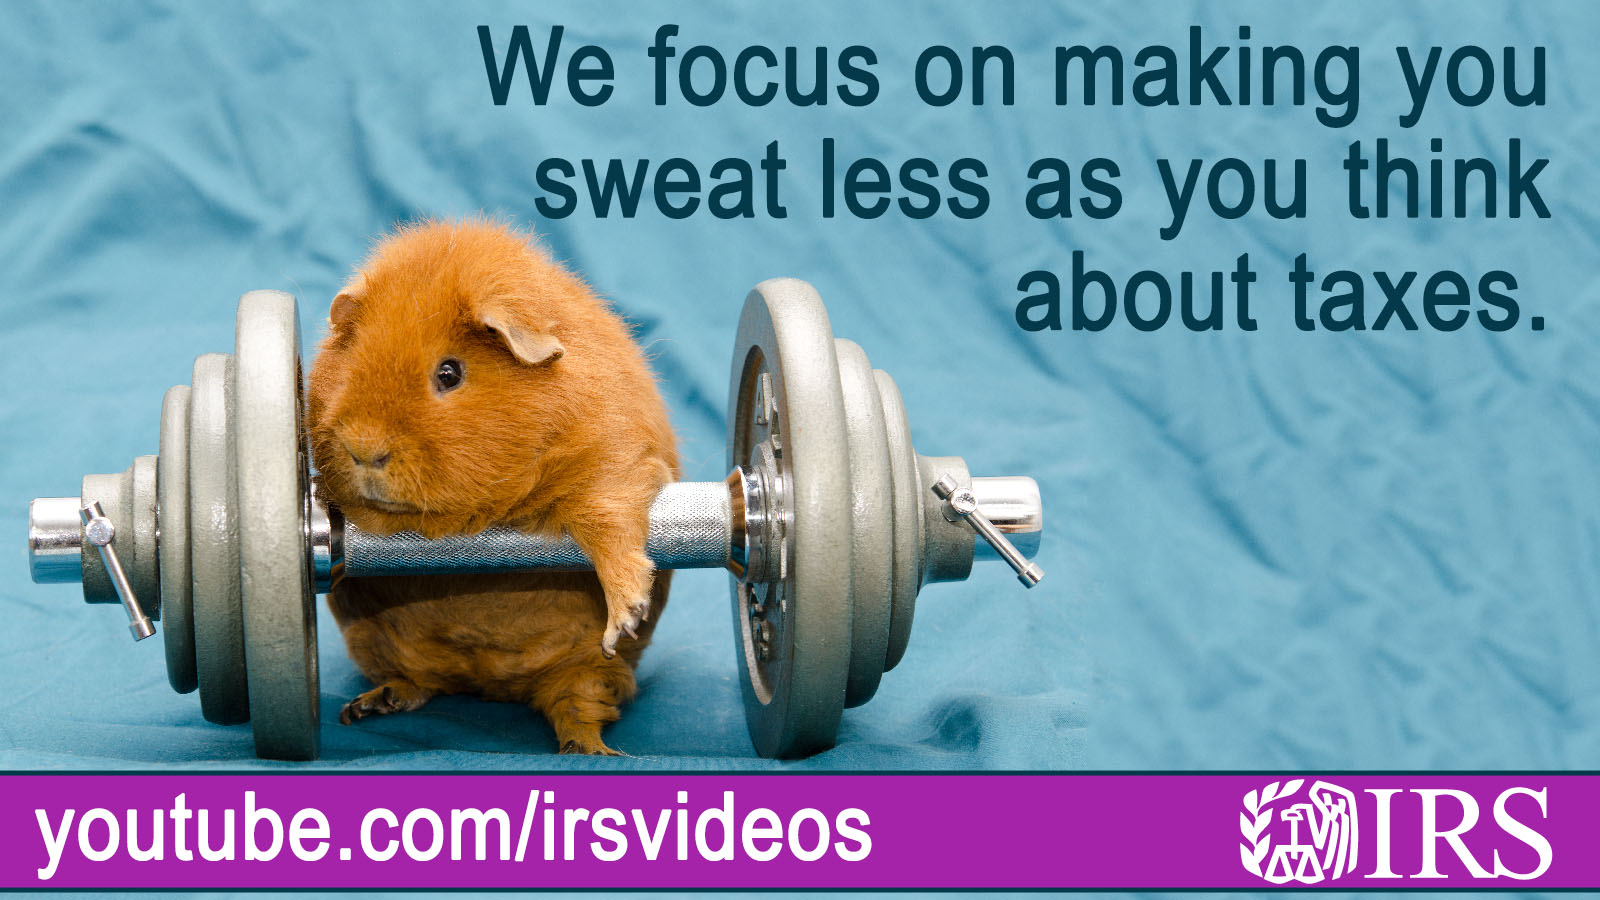 A little guinea pig stands with a training weight set.  IRS logo. Text: We focus on making you sweat less as you think about taxes. Youtube.com/irsvideos